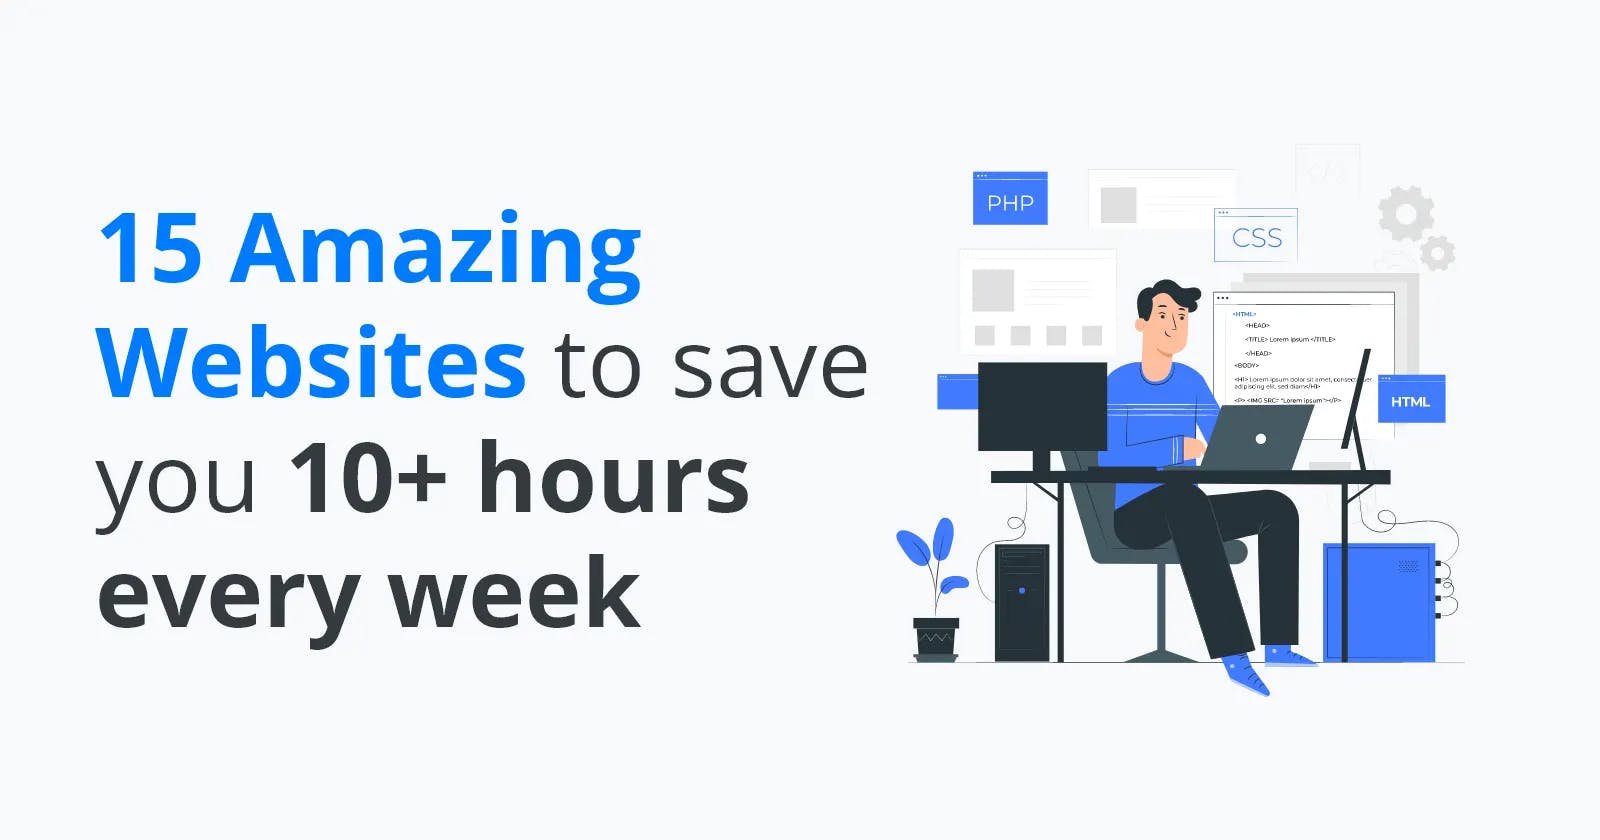 15 amazing websites to save you 10+ hours every week